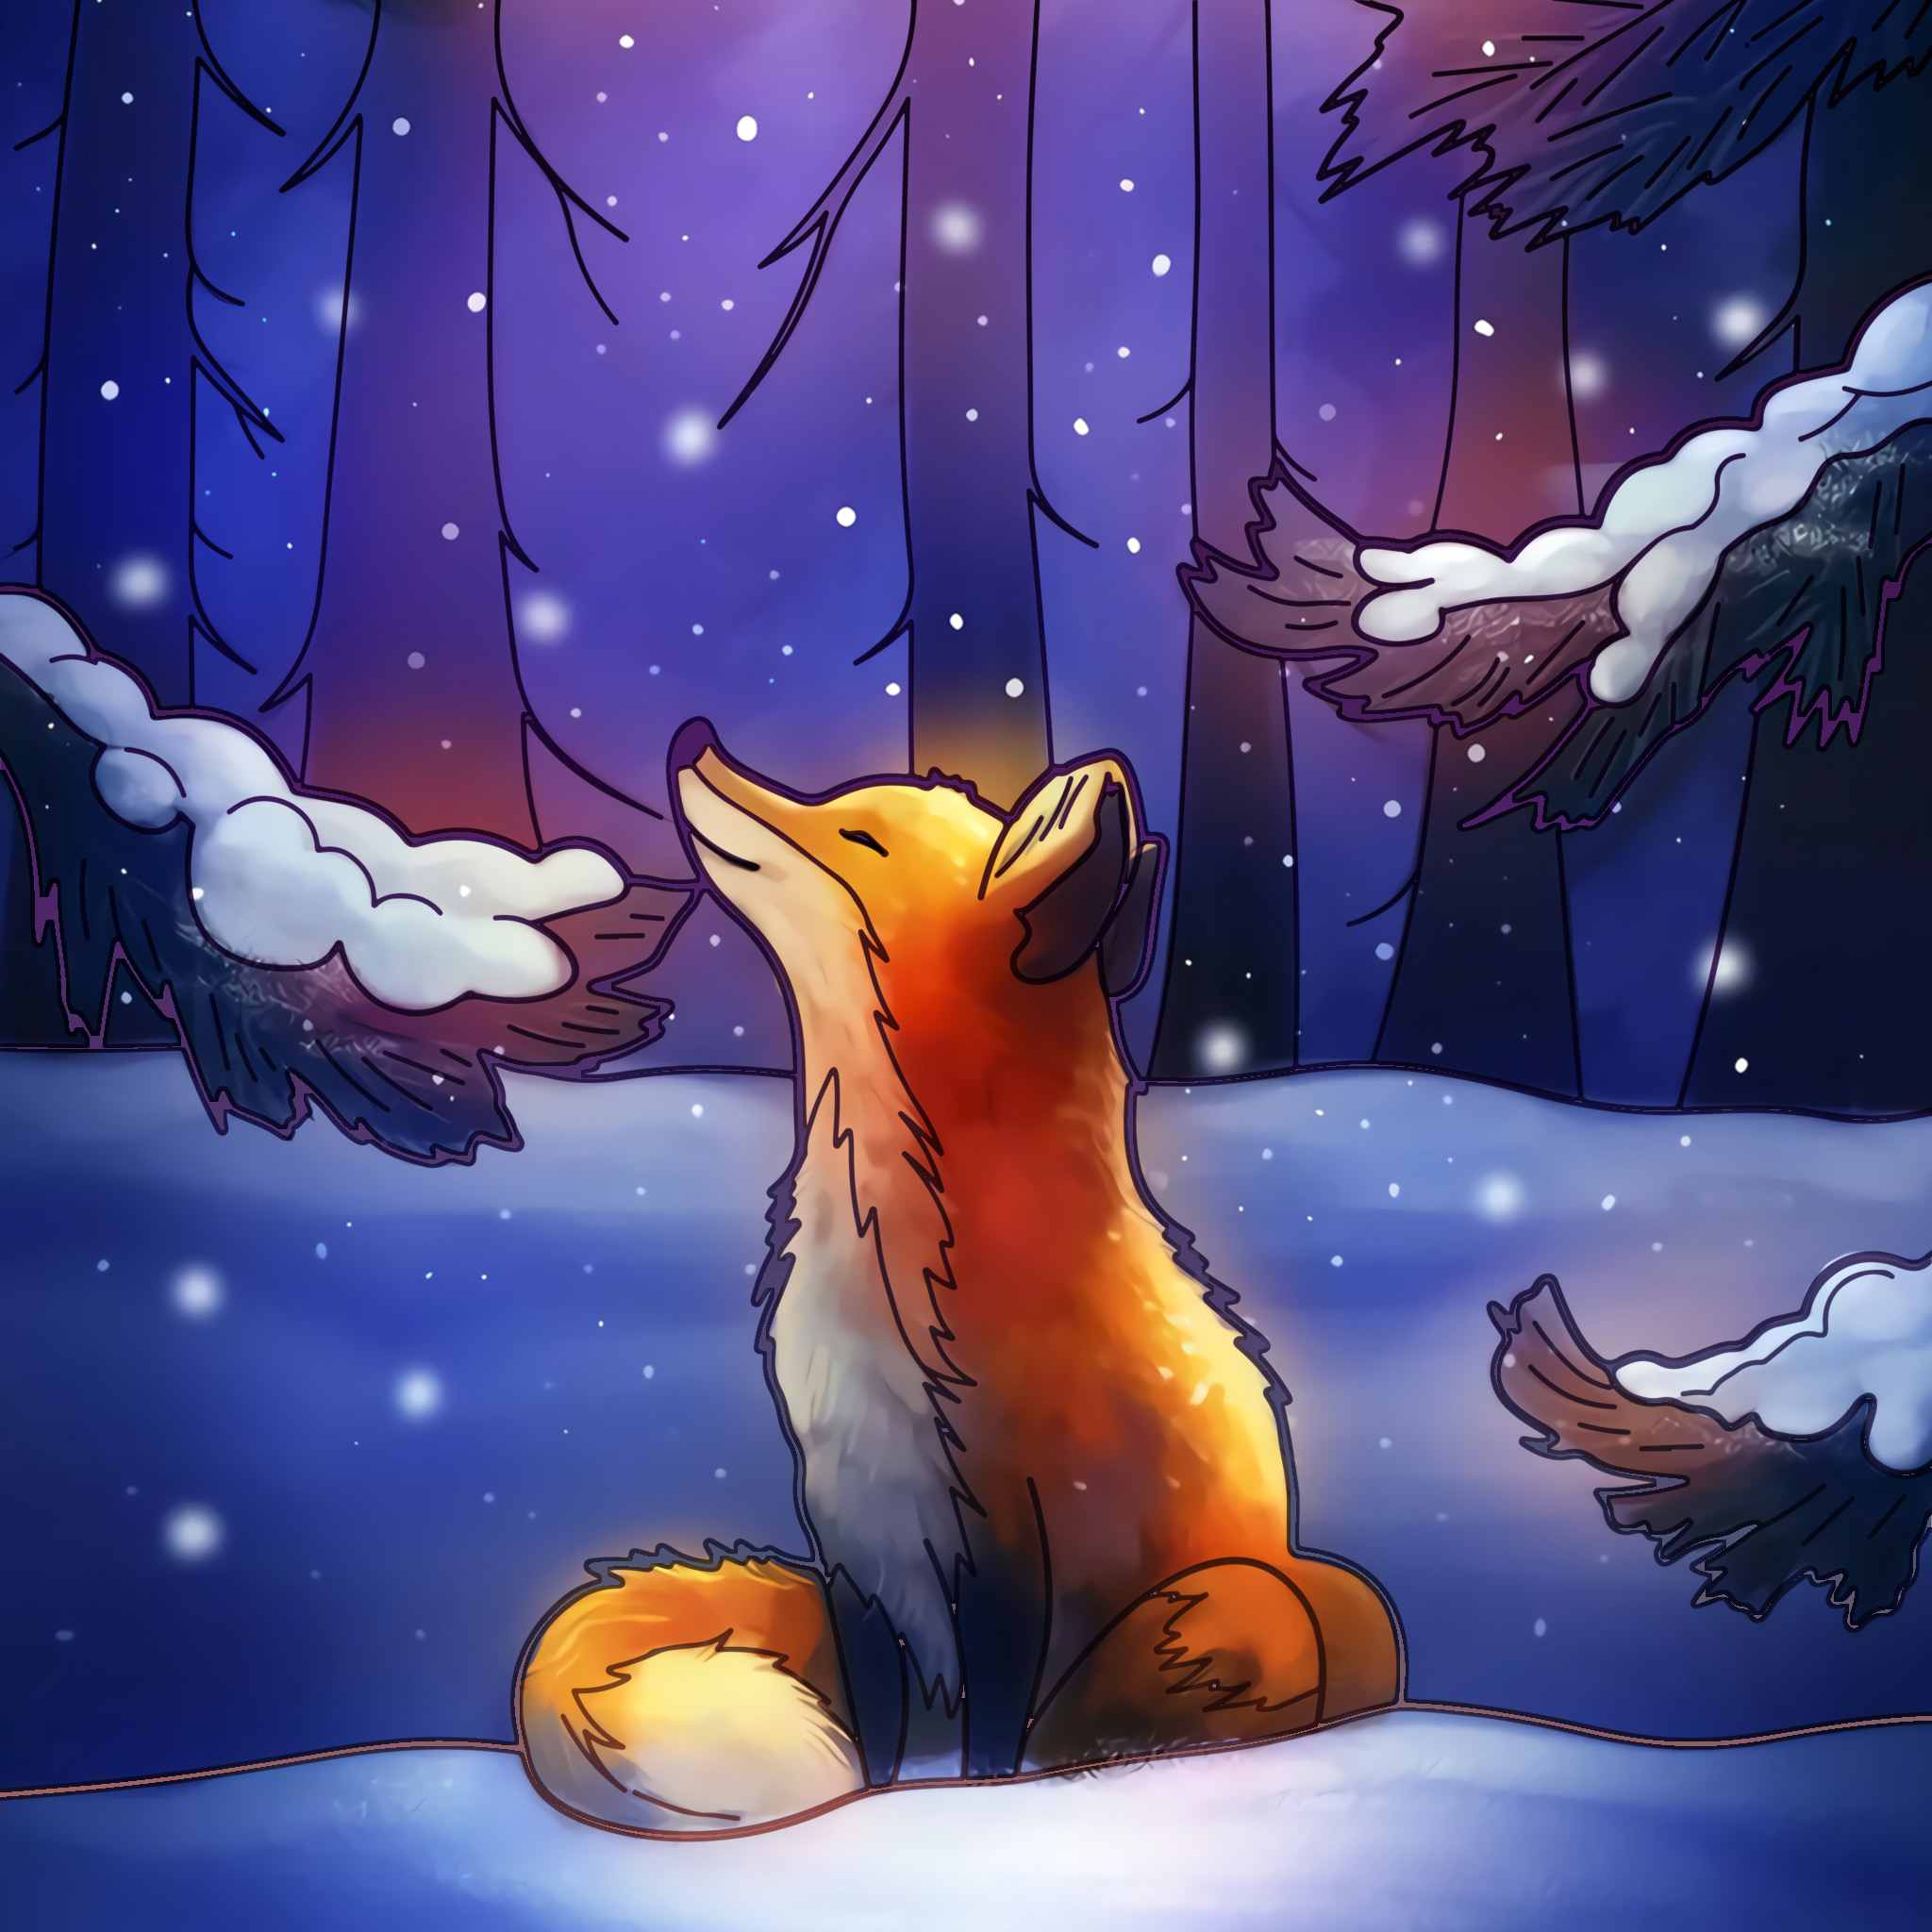 Fox, Snow, Forest (Anime Paint) by artvoyager6100 on DeviantArt